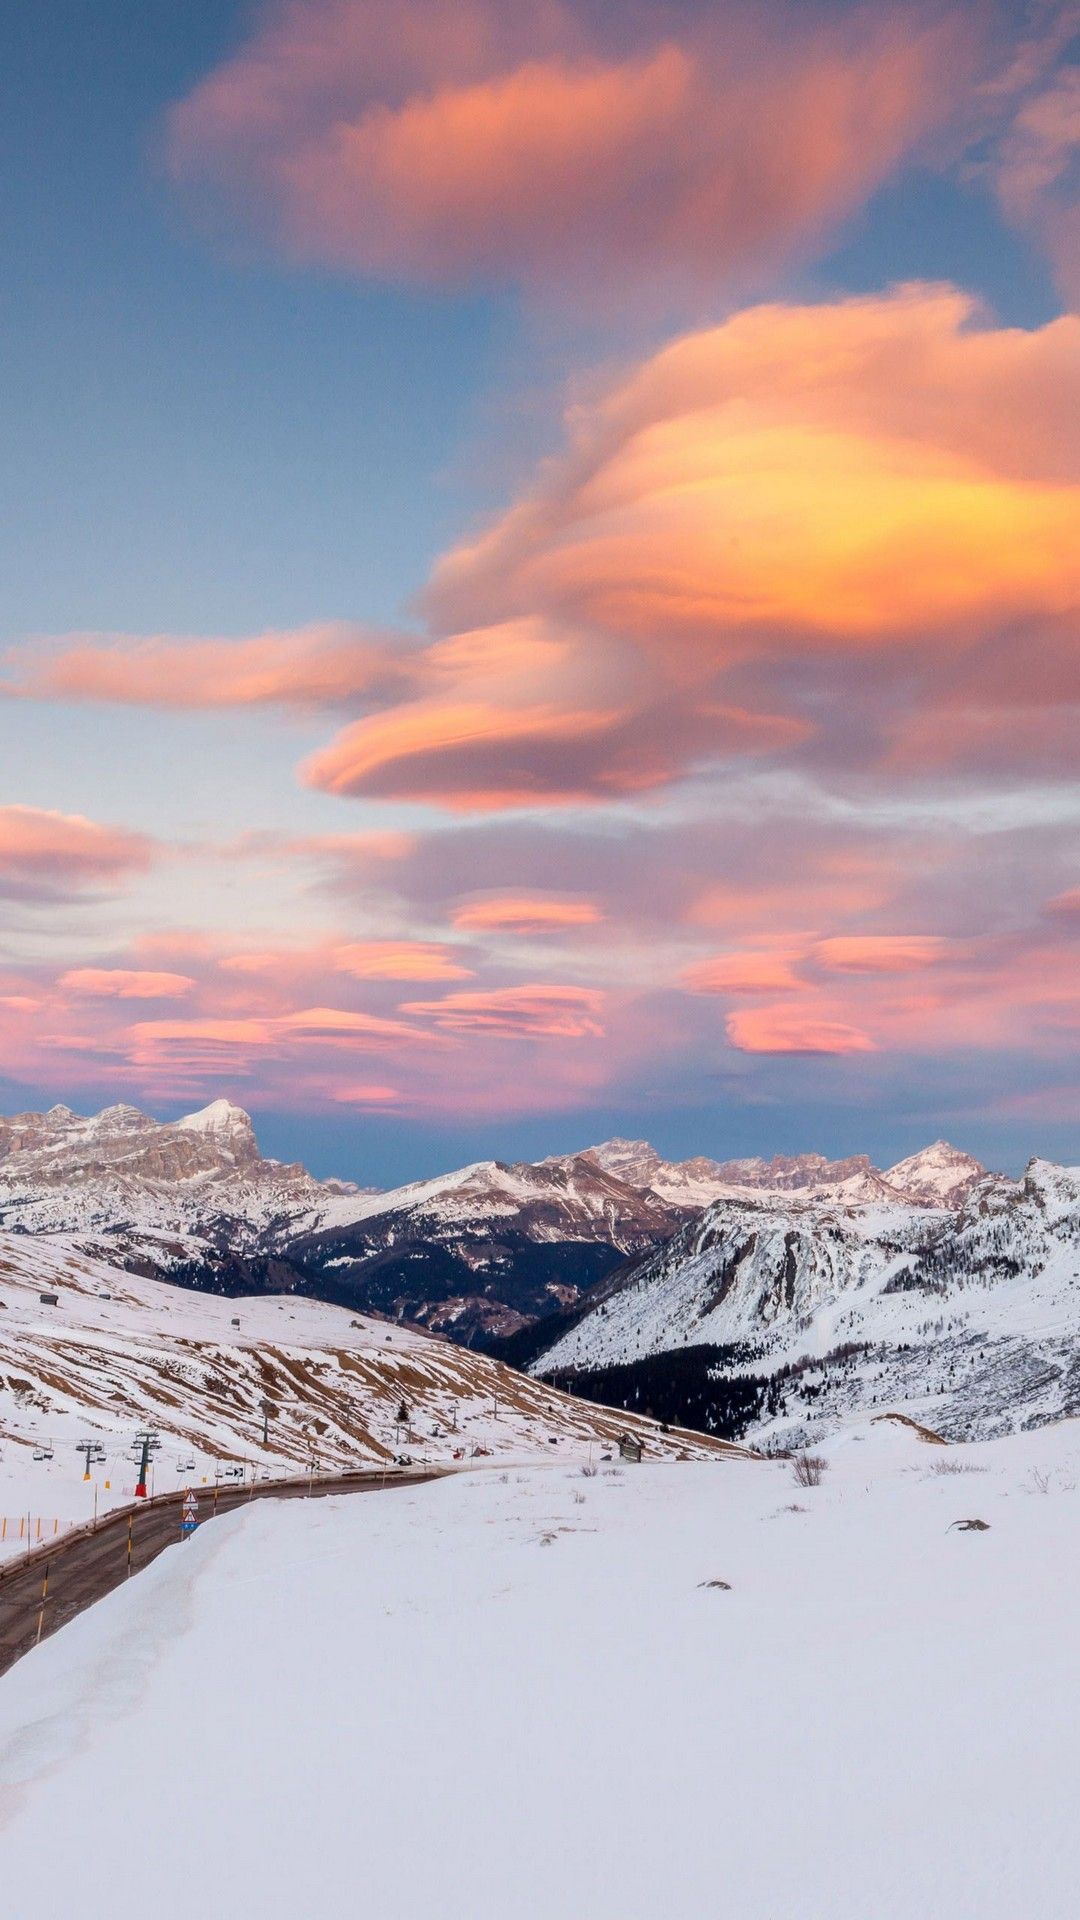 A beautiful shot of a snowy mountain range with a pink and blue sunset sky - Winter, snow, ice